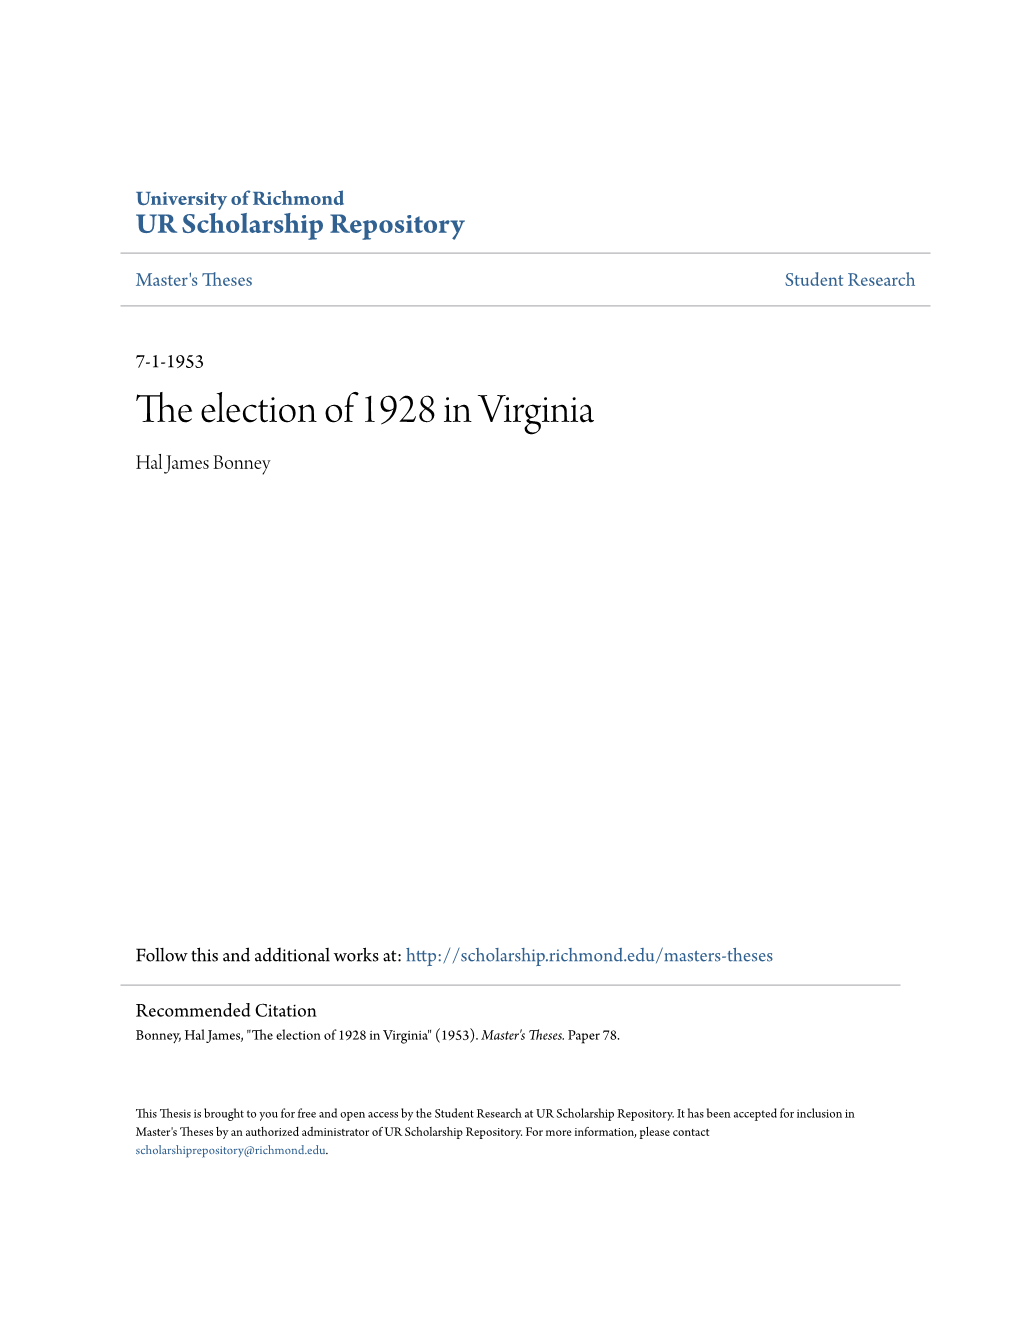 The Election of 1928 in Virginia Hal James Bonney